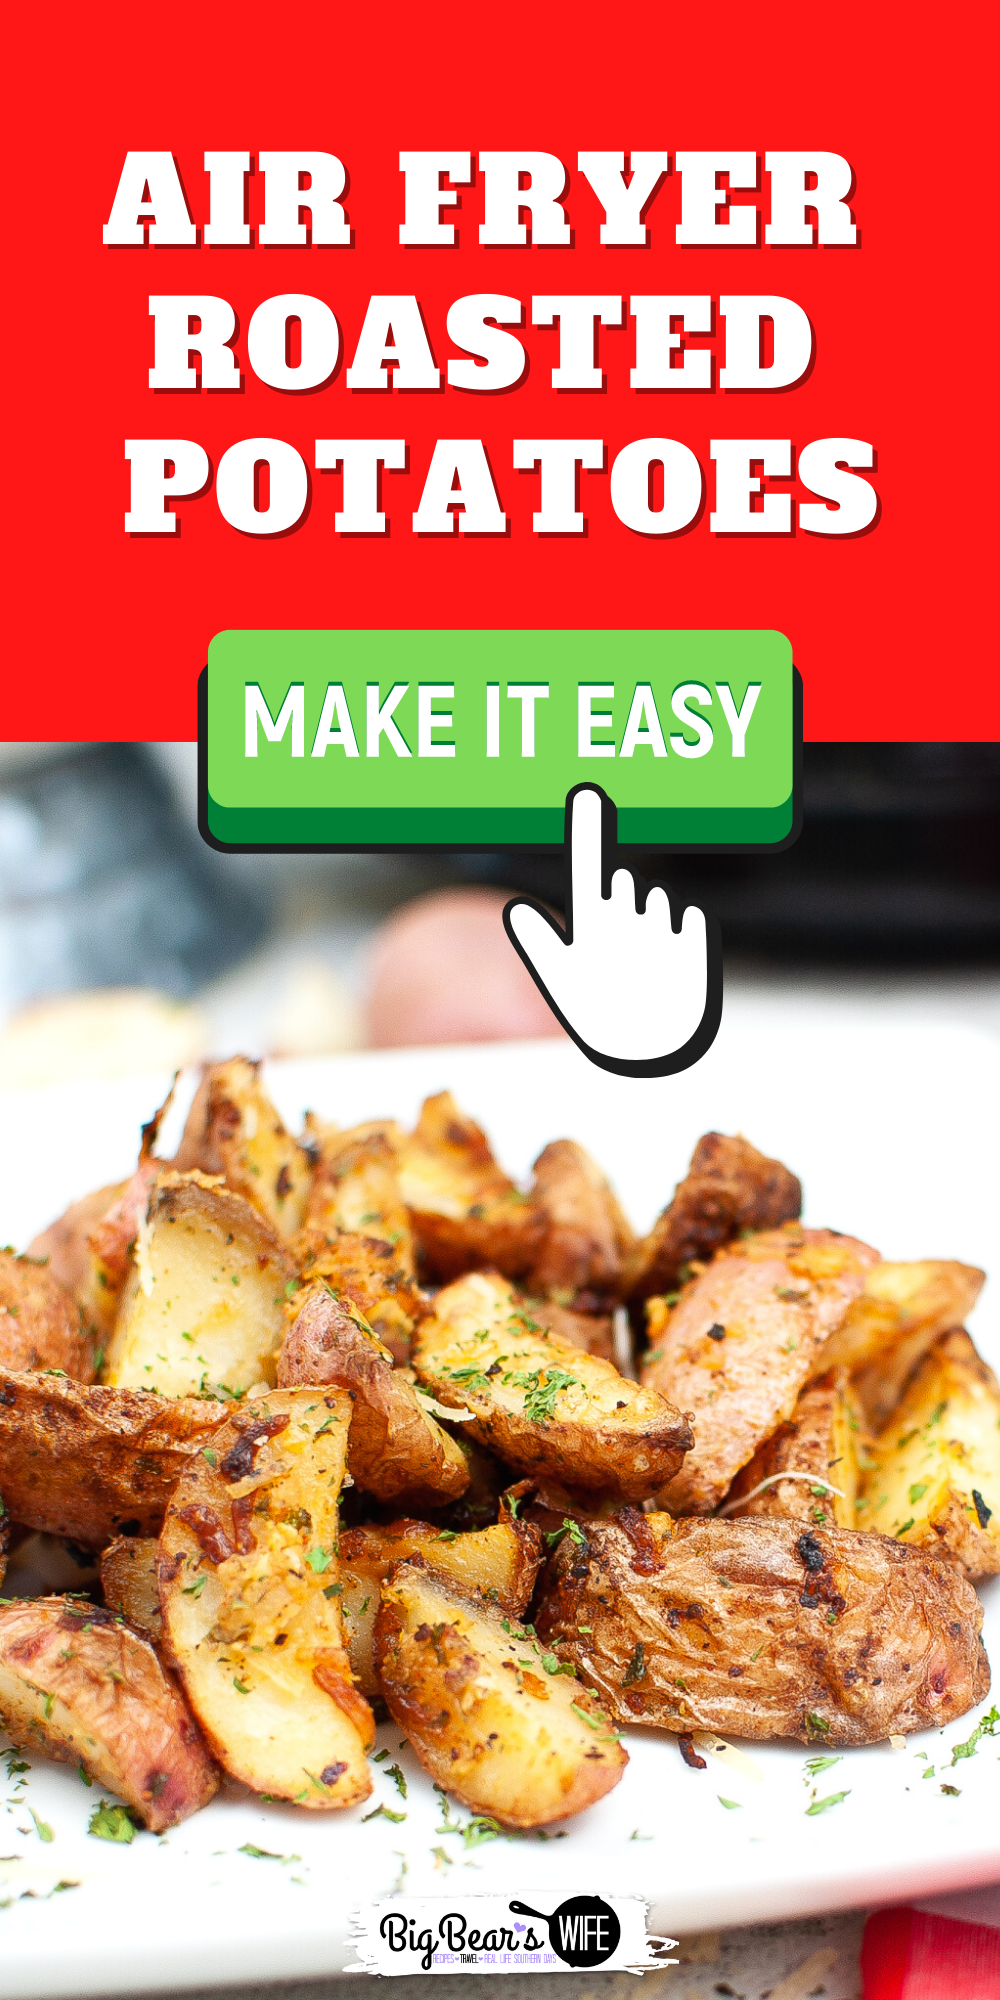 These crispy Air Fryer Roasted Potatoes take about 15 minutes to roast in the air fryer and make the perfect side dish!  via @bigbearswife